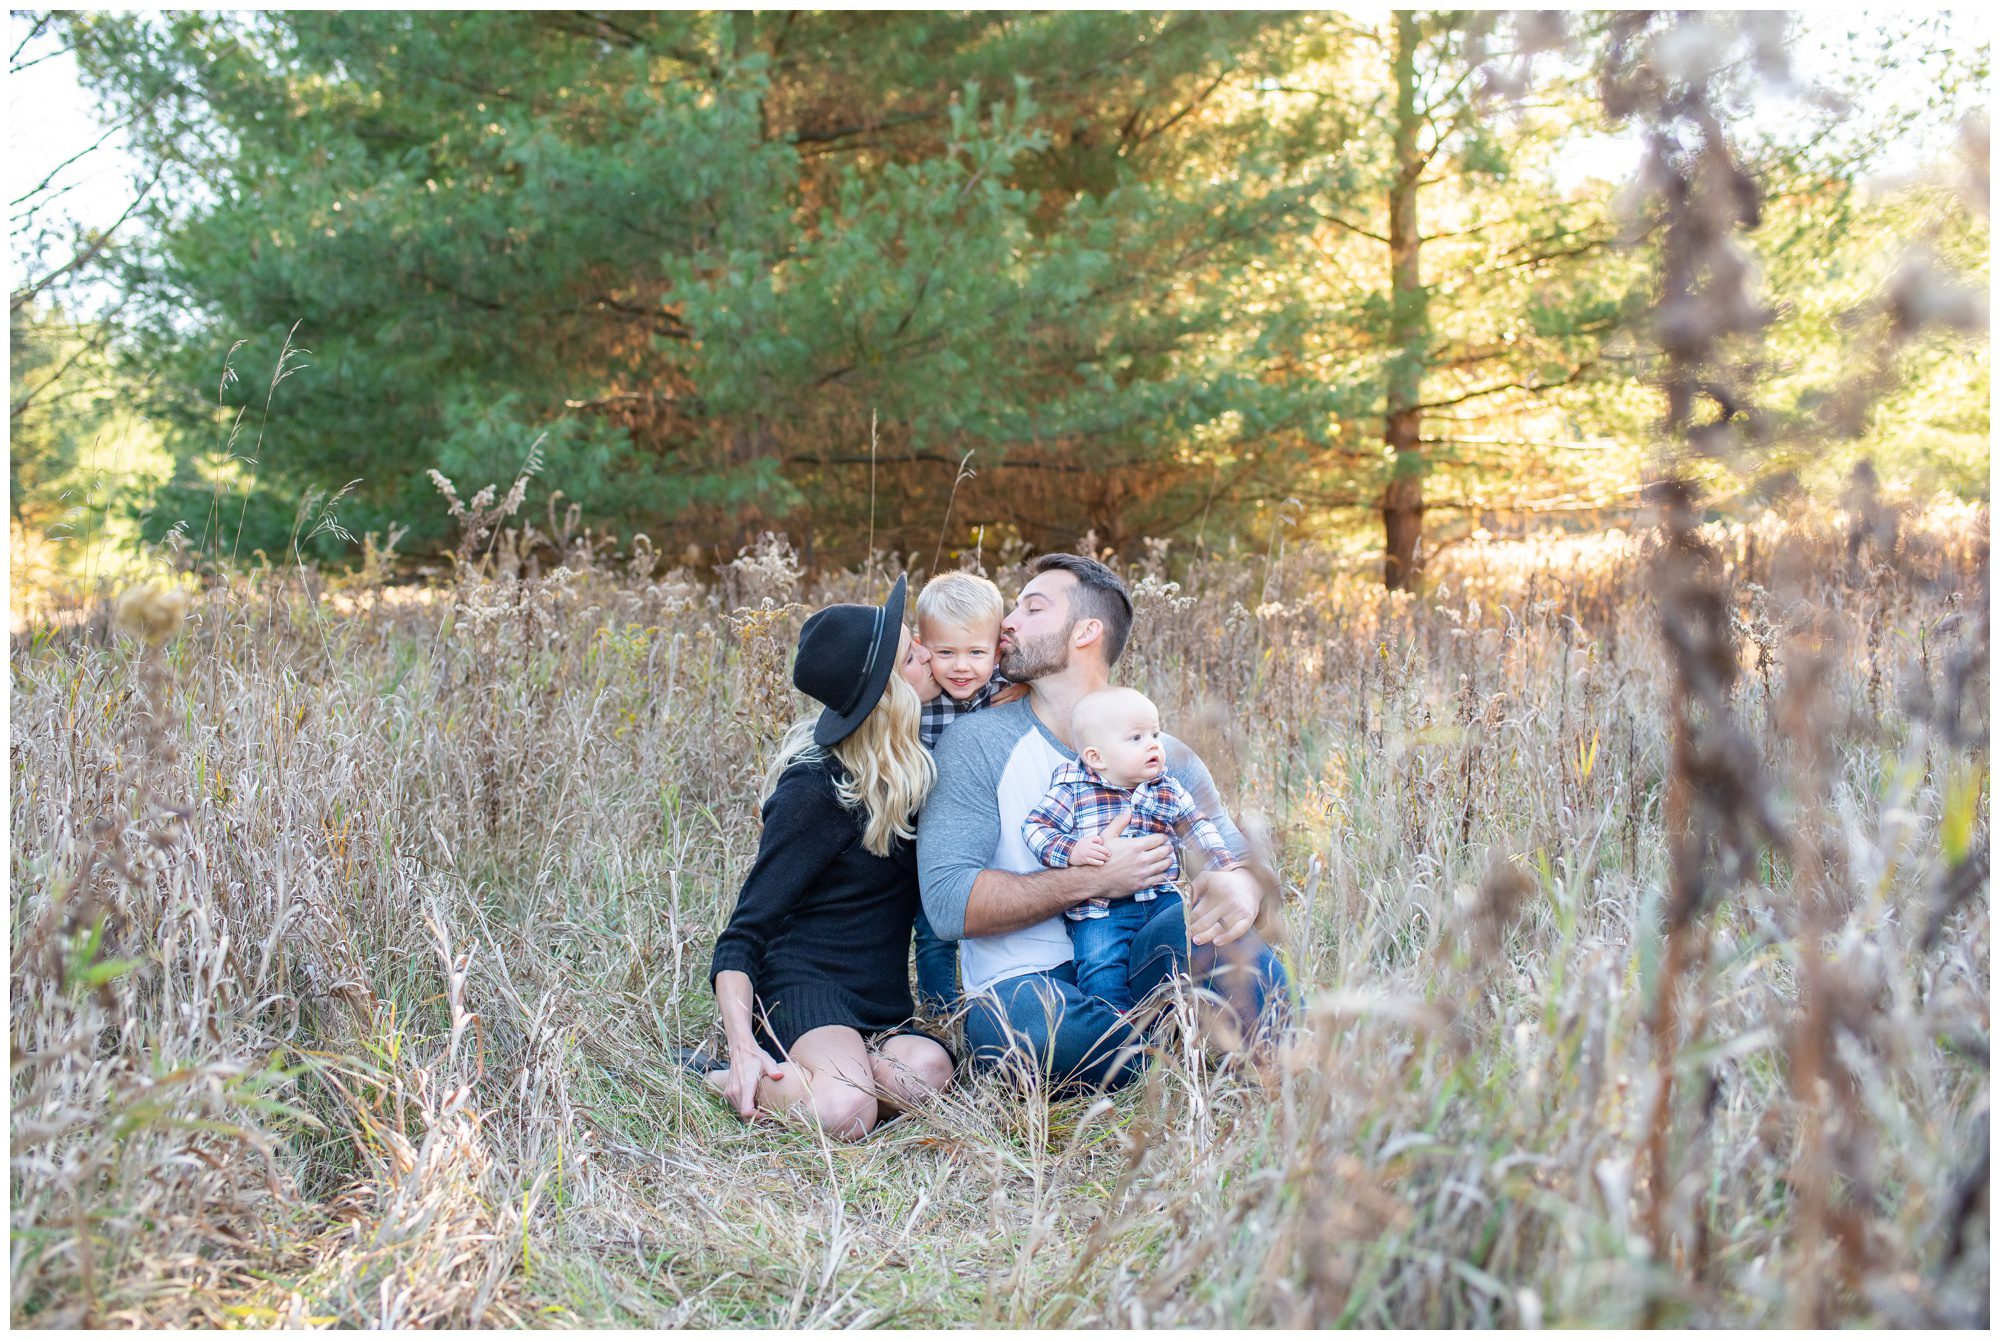 Family of 4 sitting in fall grass at Komoka Provincial Park.How to keep family photos fun & easy